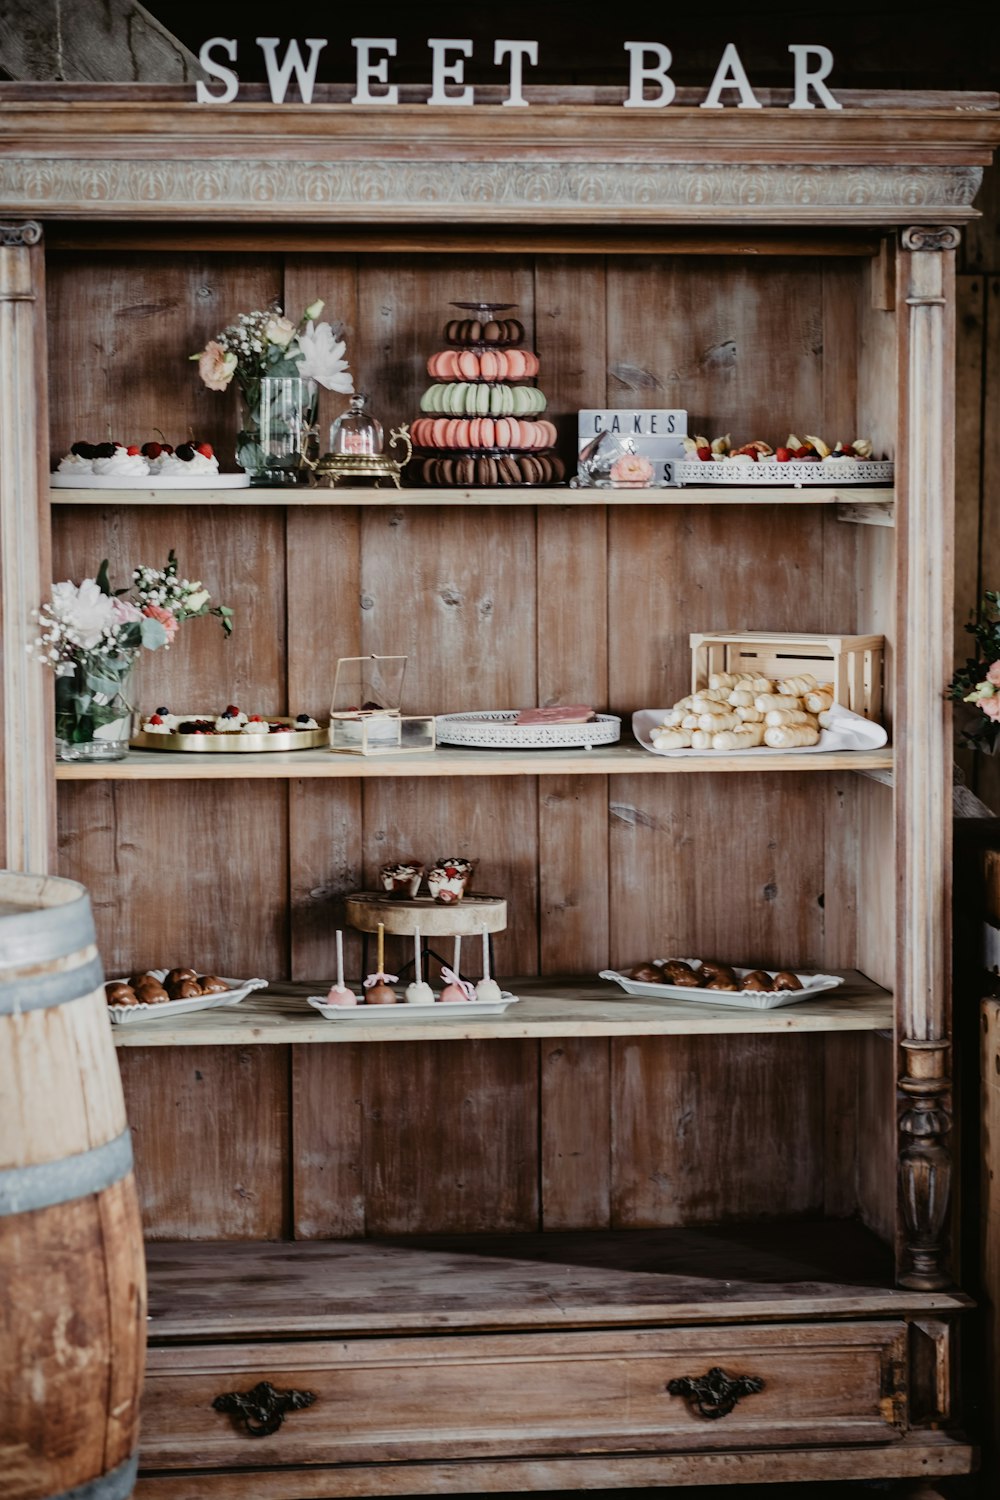 cupcakes on brown wooden shelf